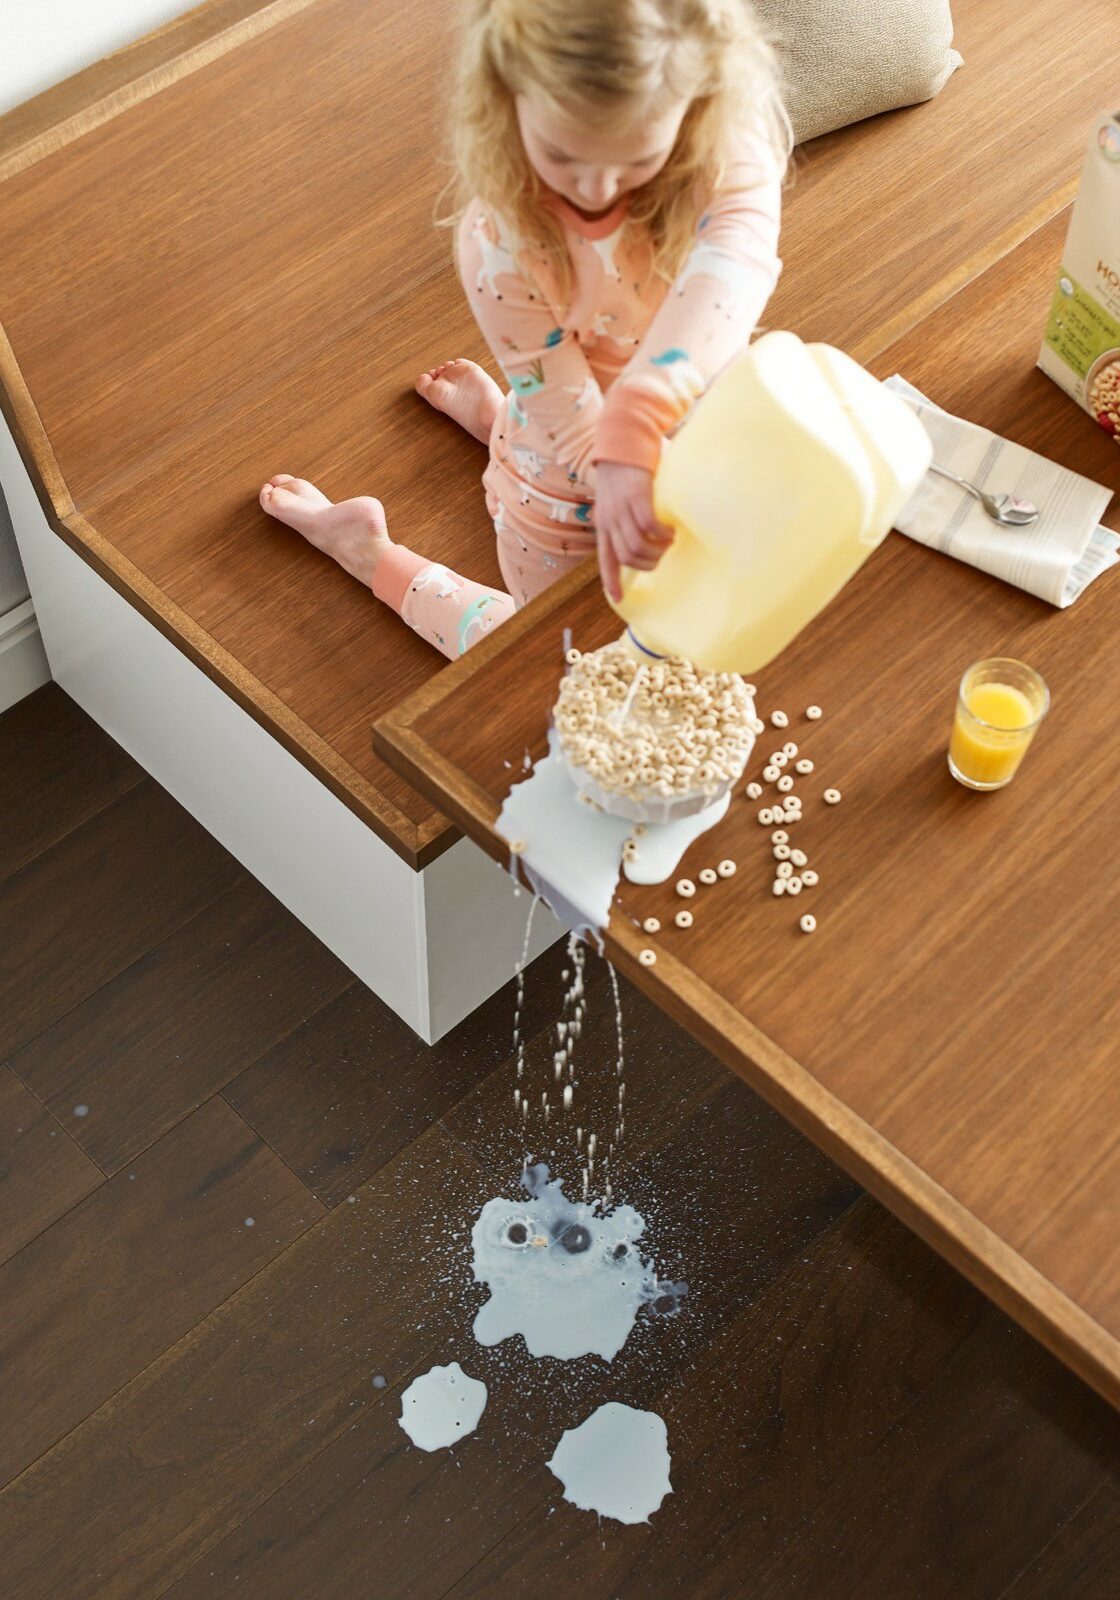 Milk spill cleaning | Steamway Floor To Ceiling